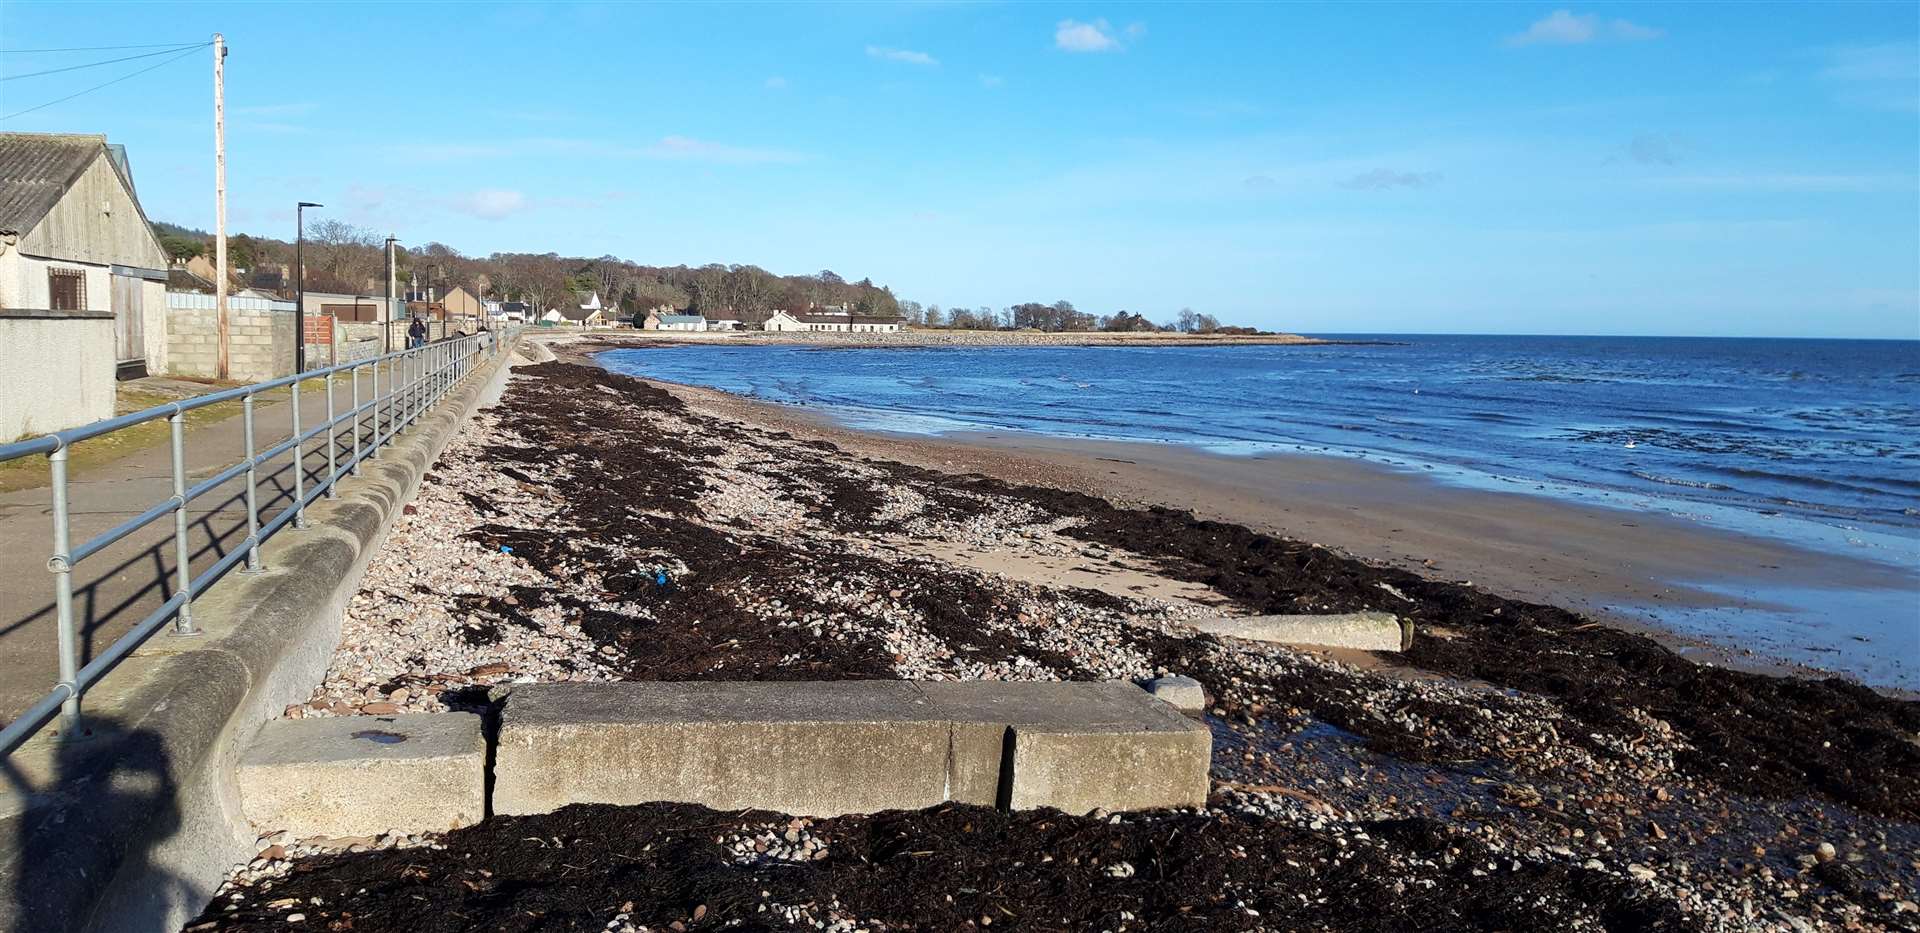 The existing breakwater, which can be seen at low tide, lies some way out from the front shore at Golspie.